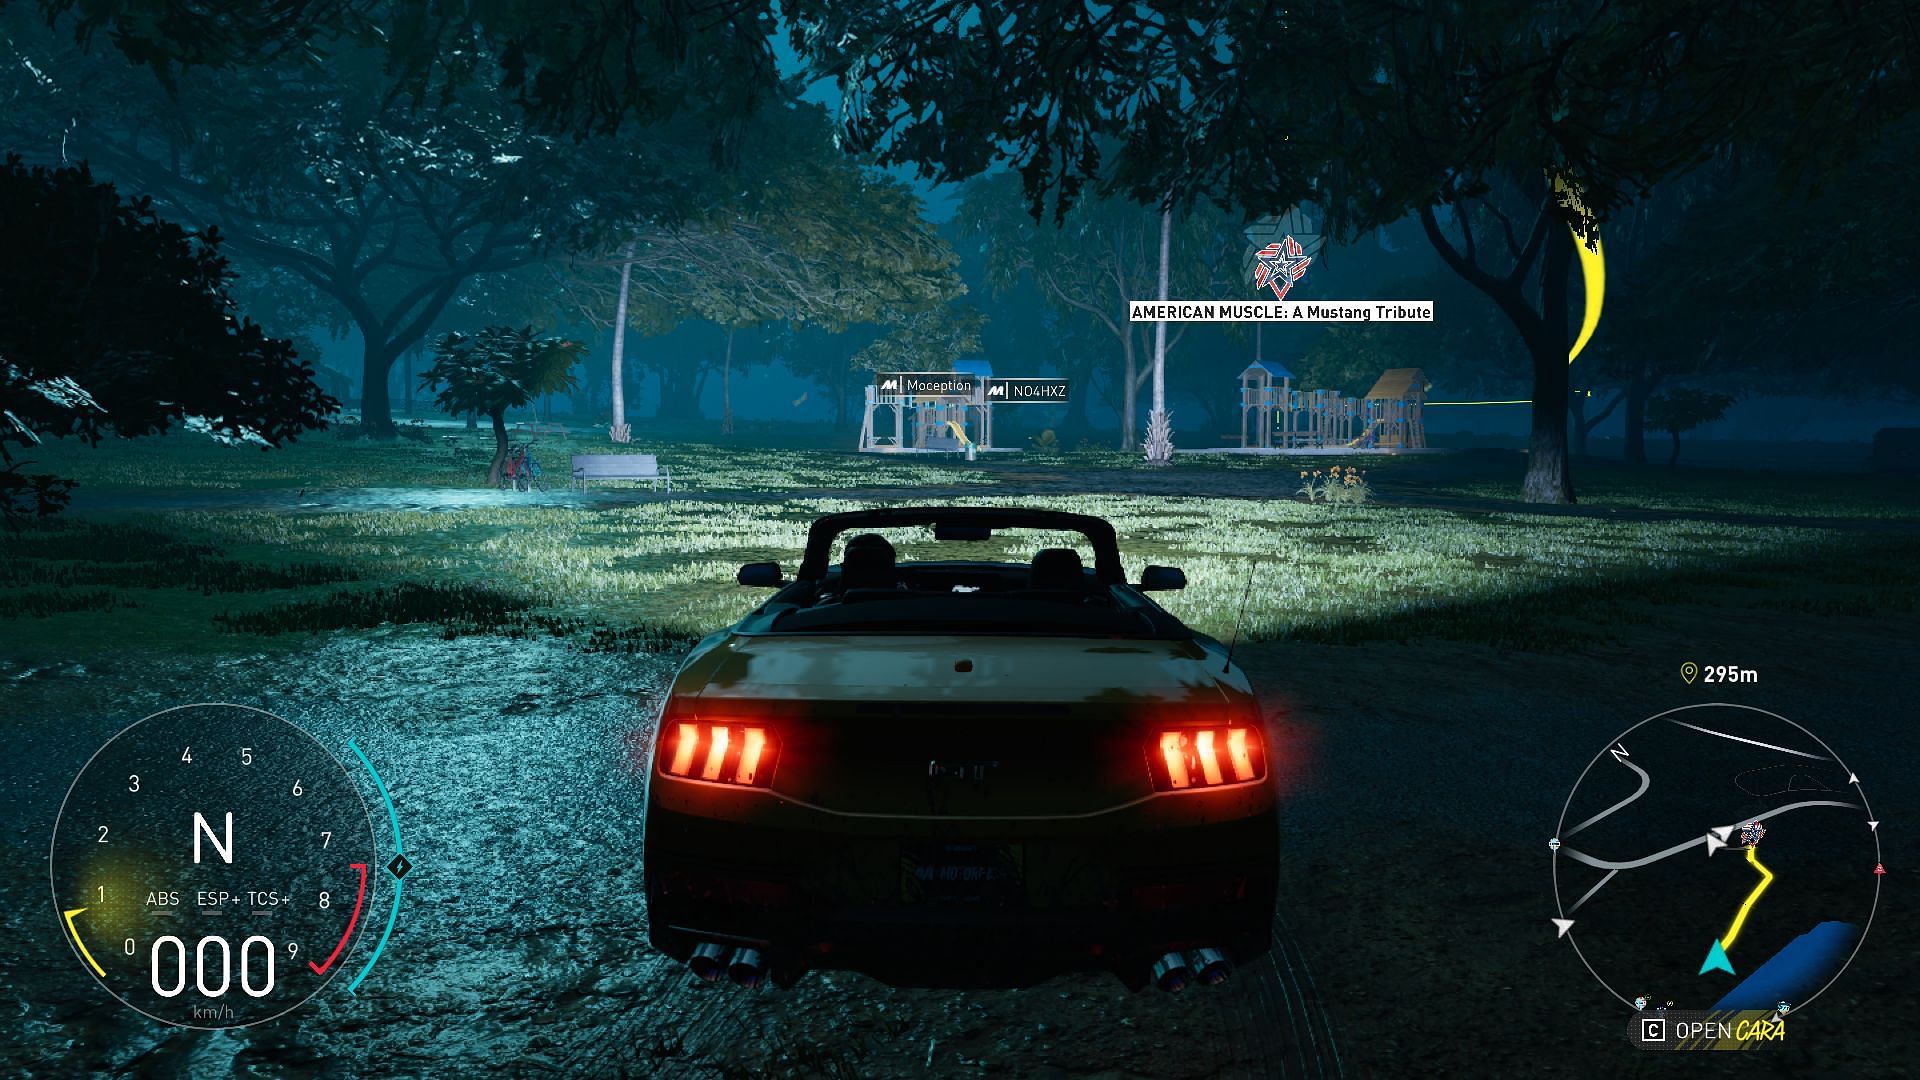 Visual elements, even at night, are fairly detailed. (Image via Ubisoft)